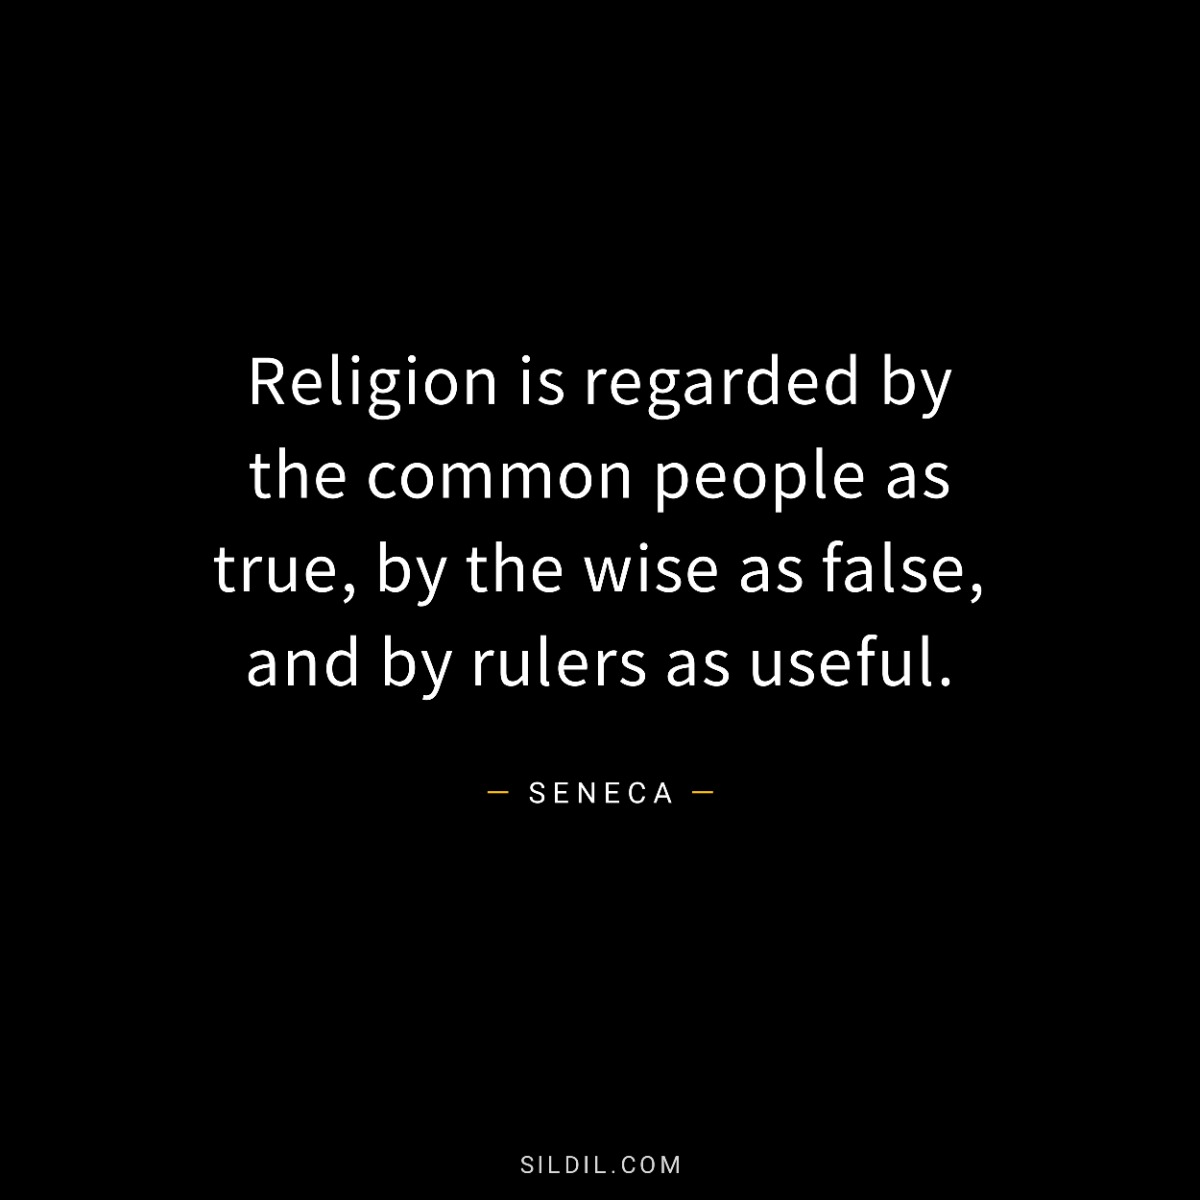 Religion is regarded by the common people as true, by the wise as false, and by rulers as useful.